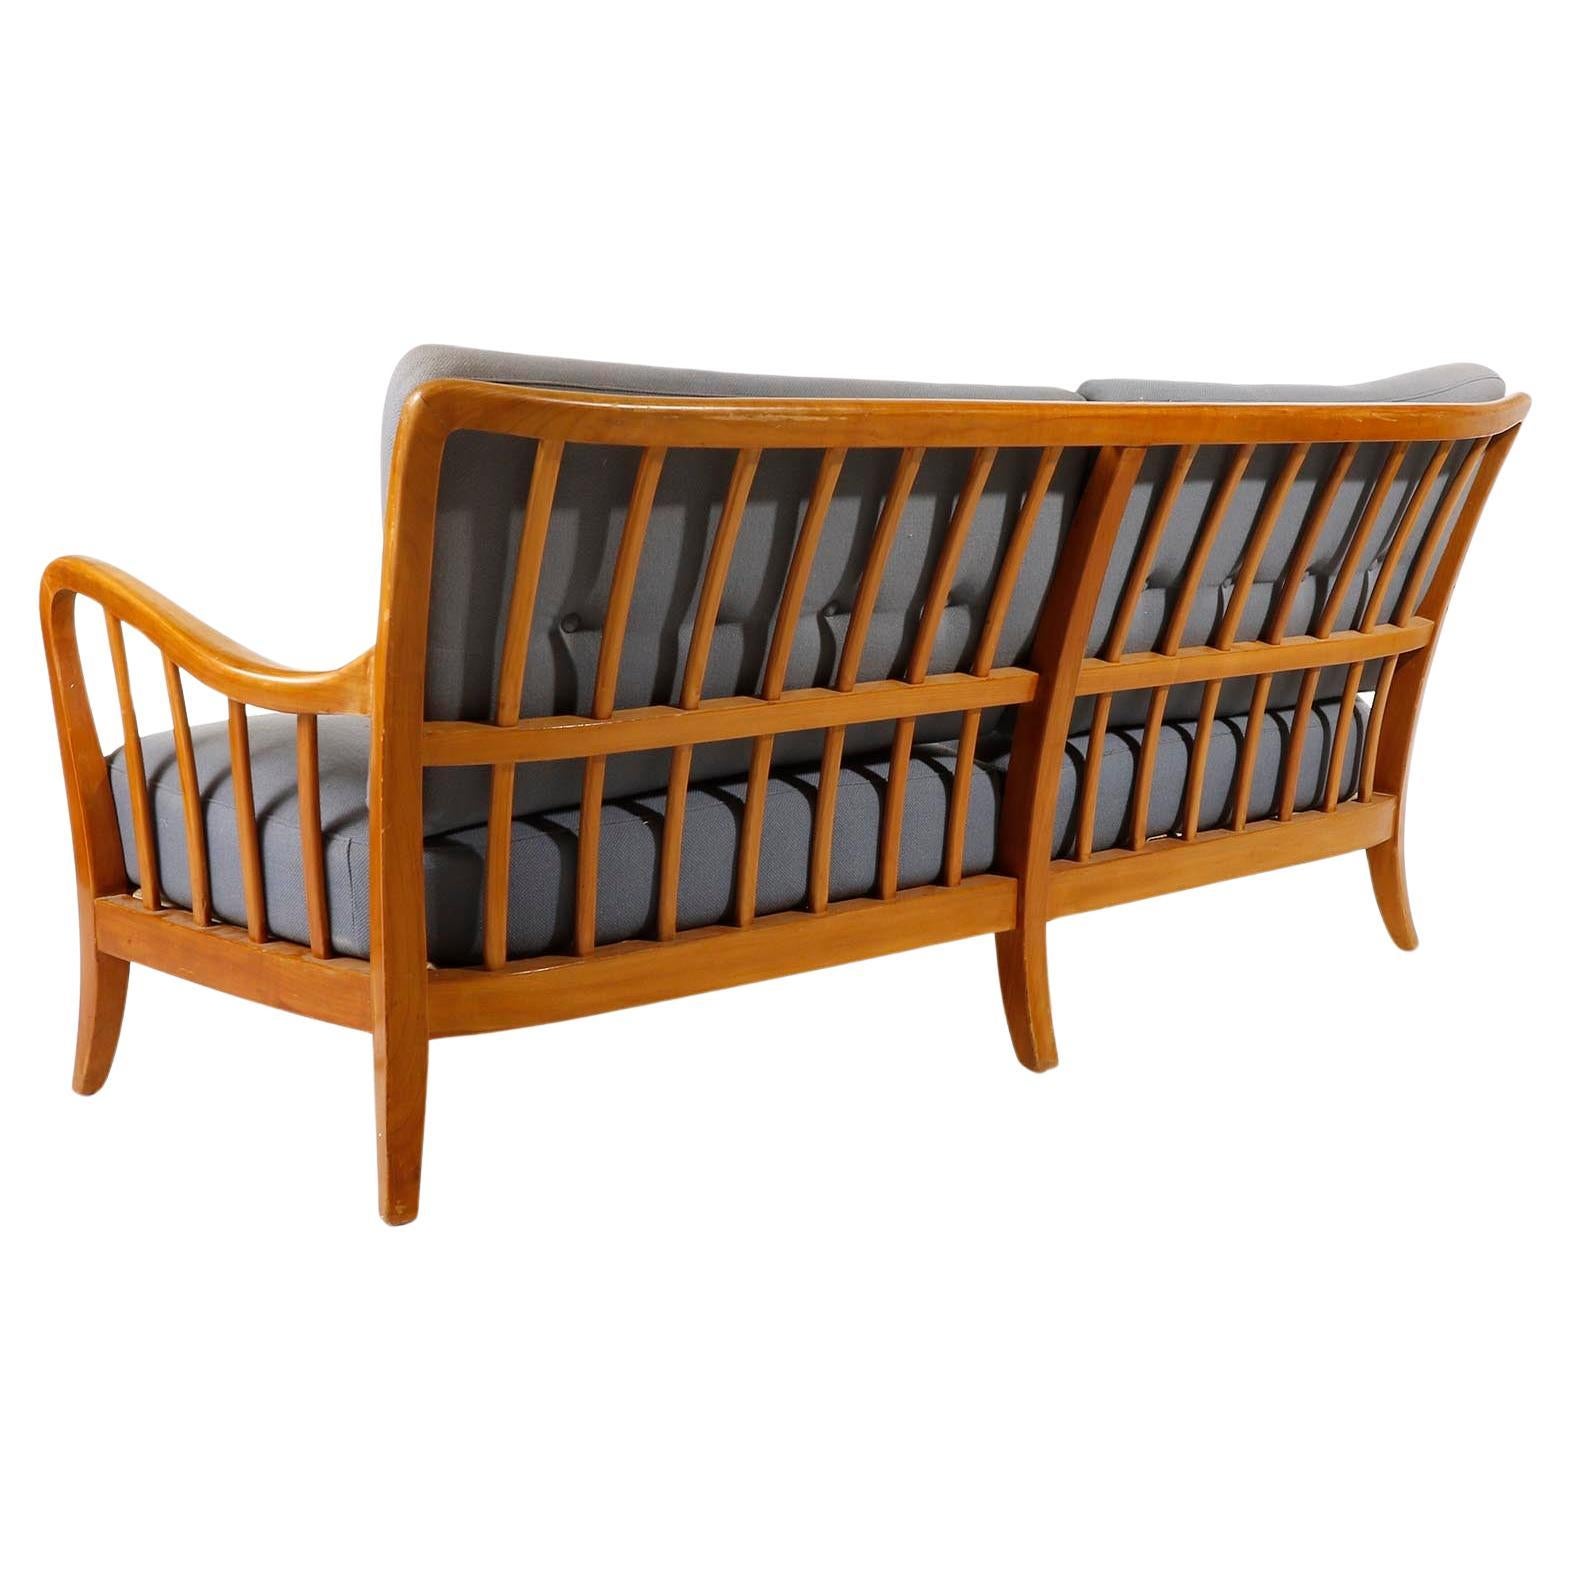 Bench Seette Seat by Thonet, Attributed to Josef Frank, Wood, 1940 For Sale